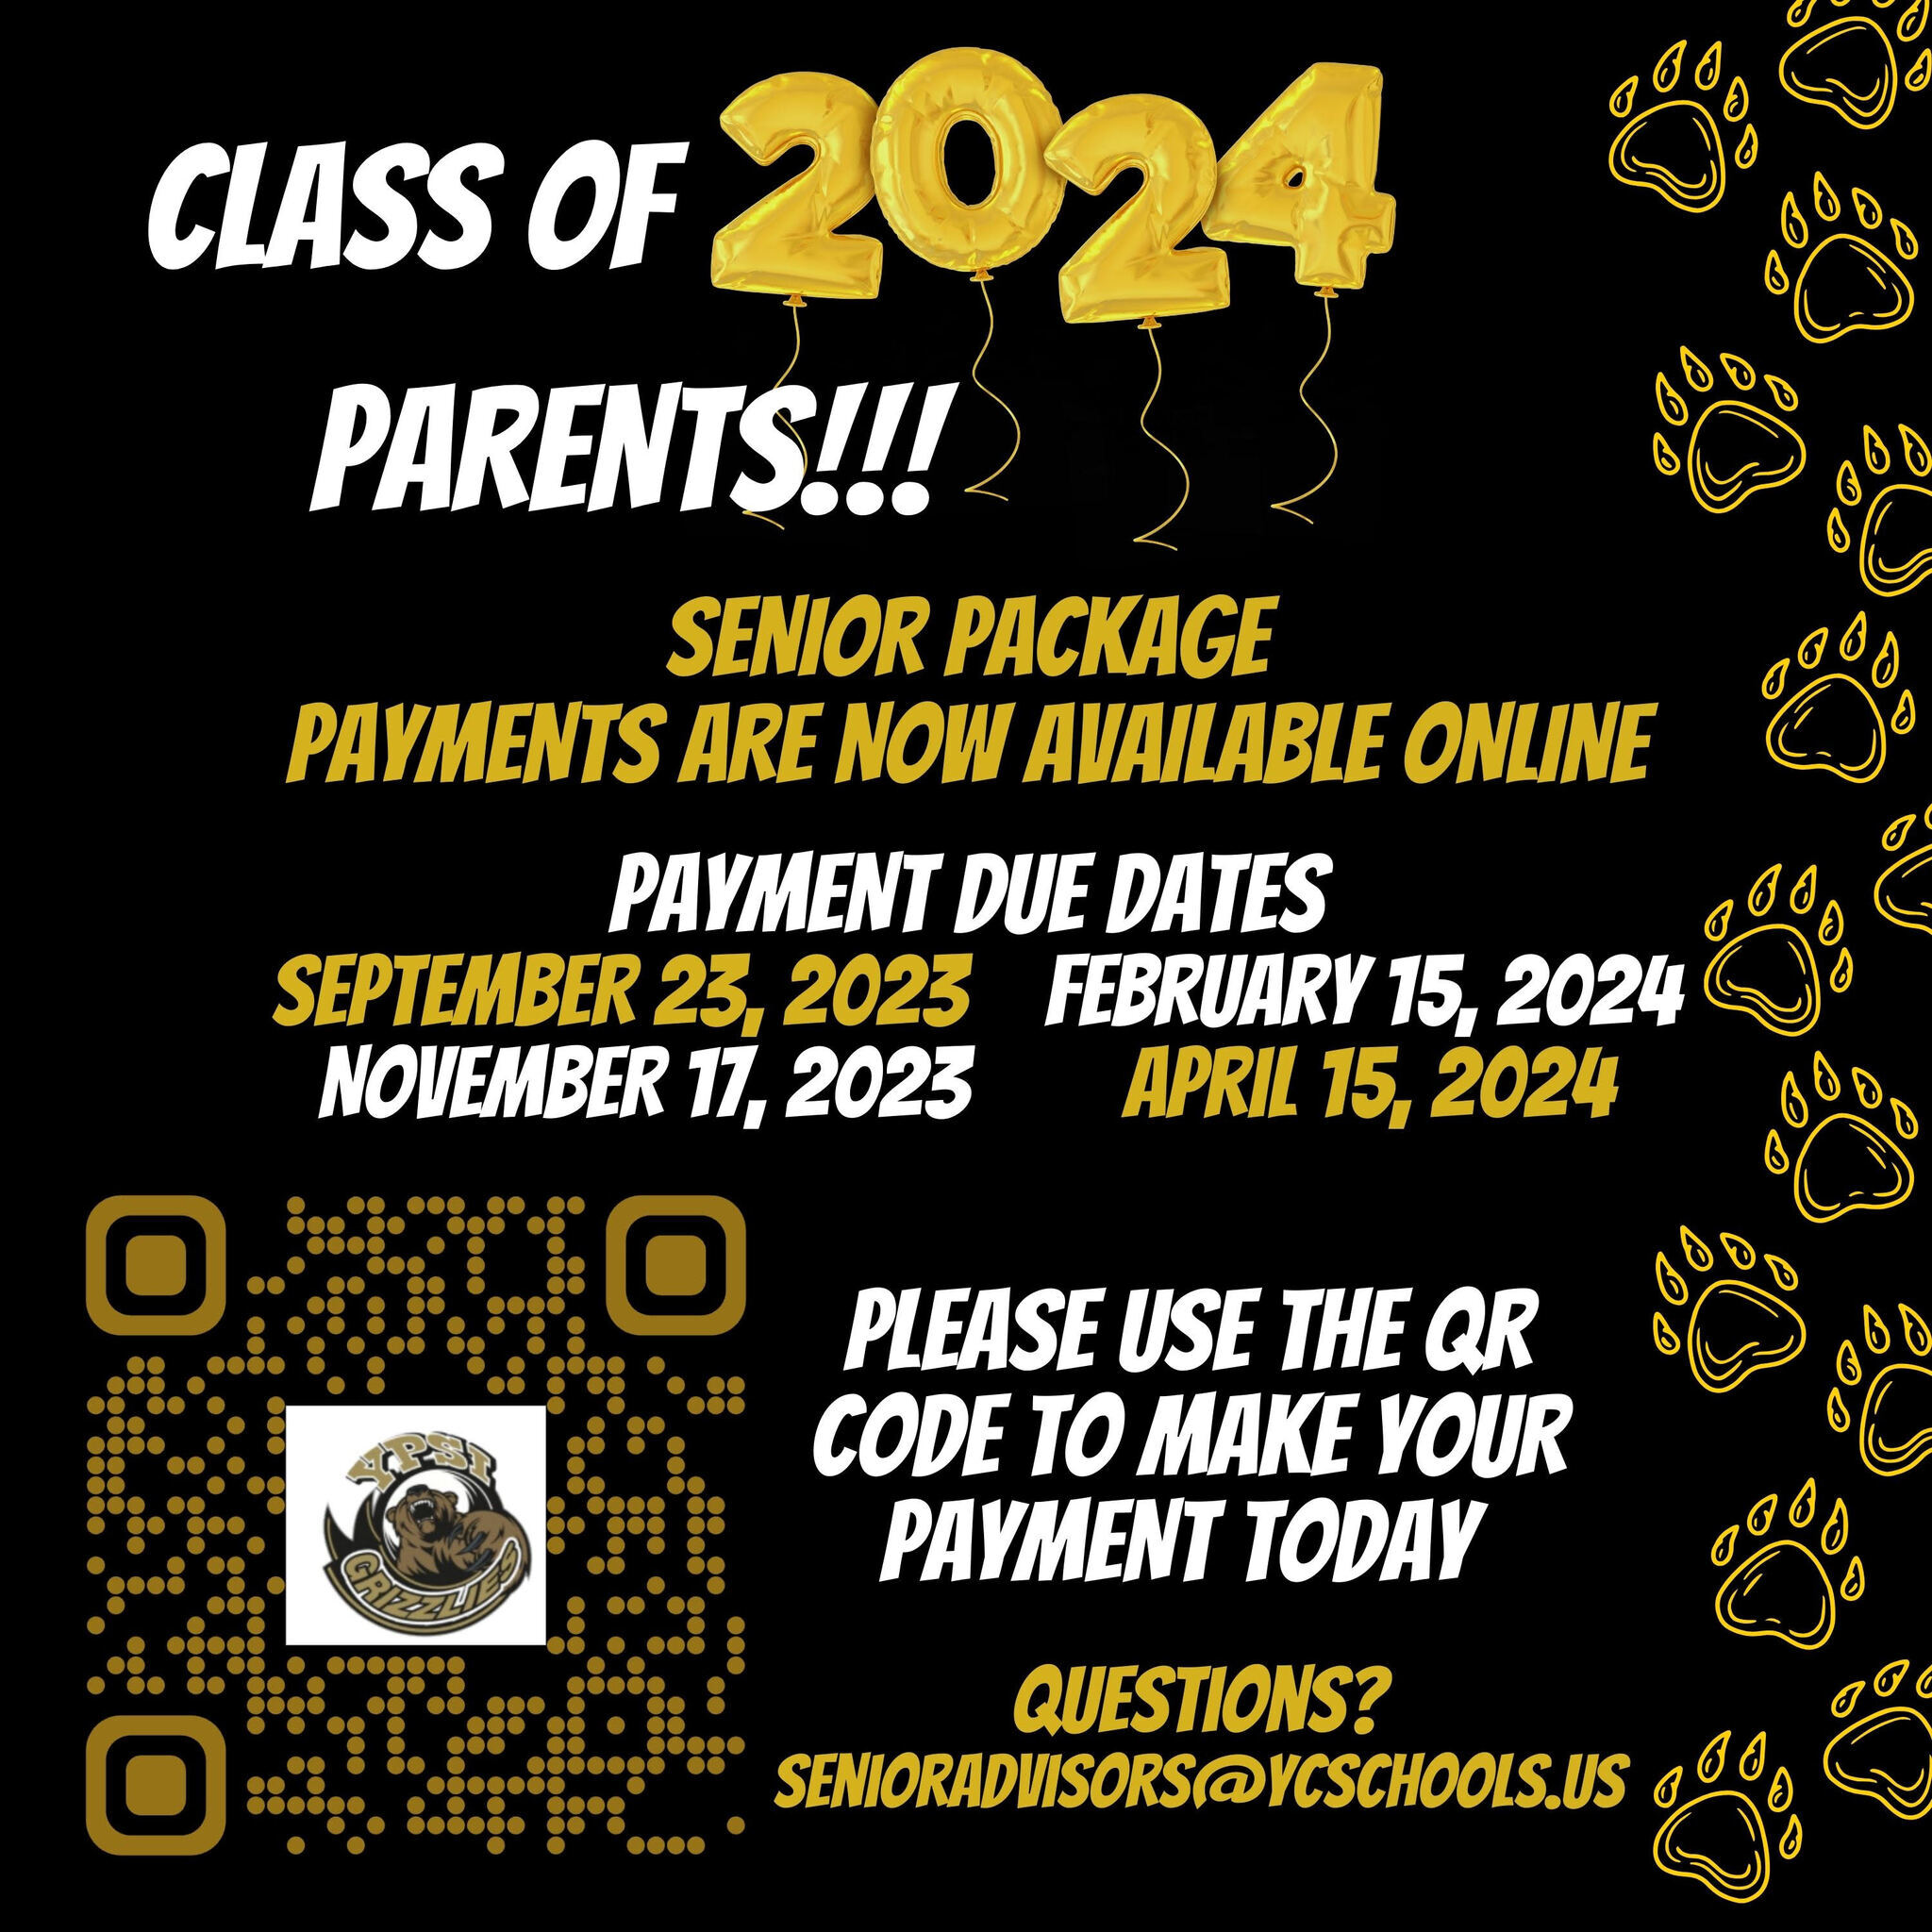 Class of 2024 Parents! Senior package payments are now available online!